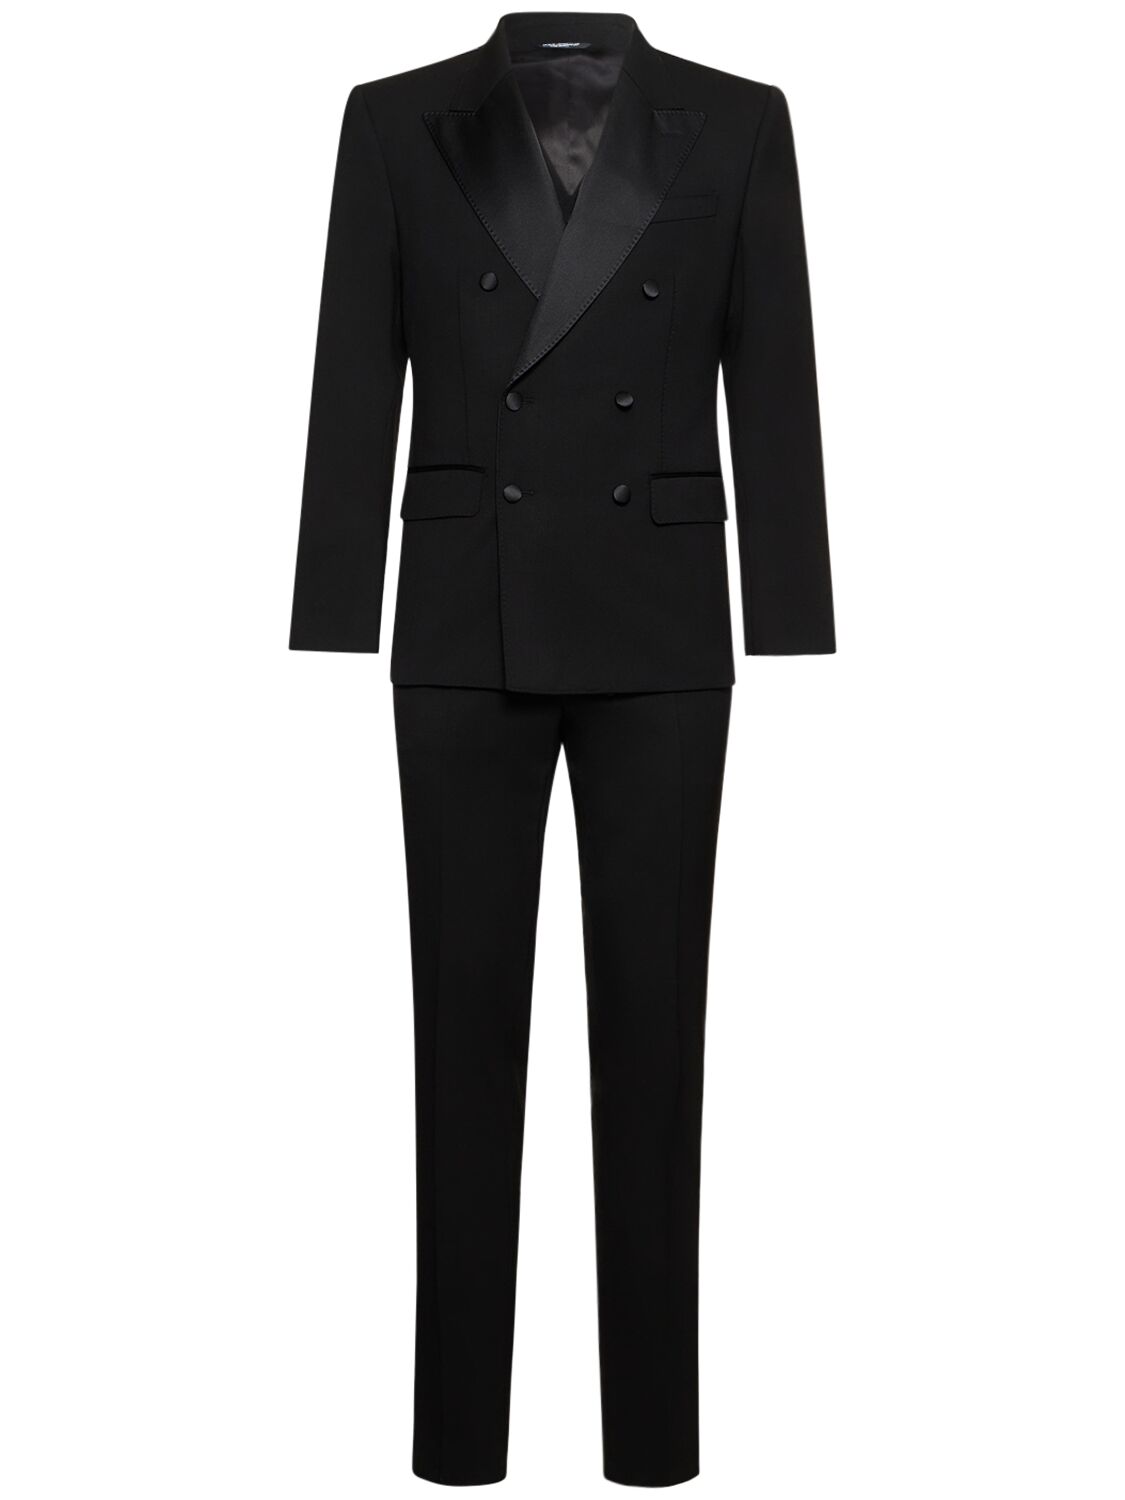 DOLCE & GABBANA DOUBLE BREASTED TUXEDO SUIT